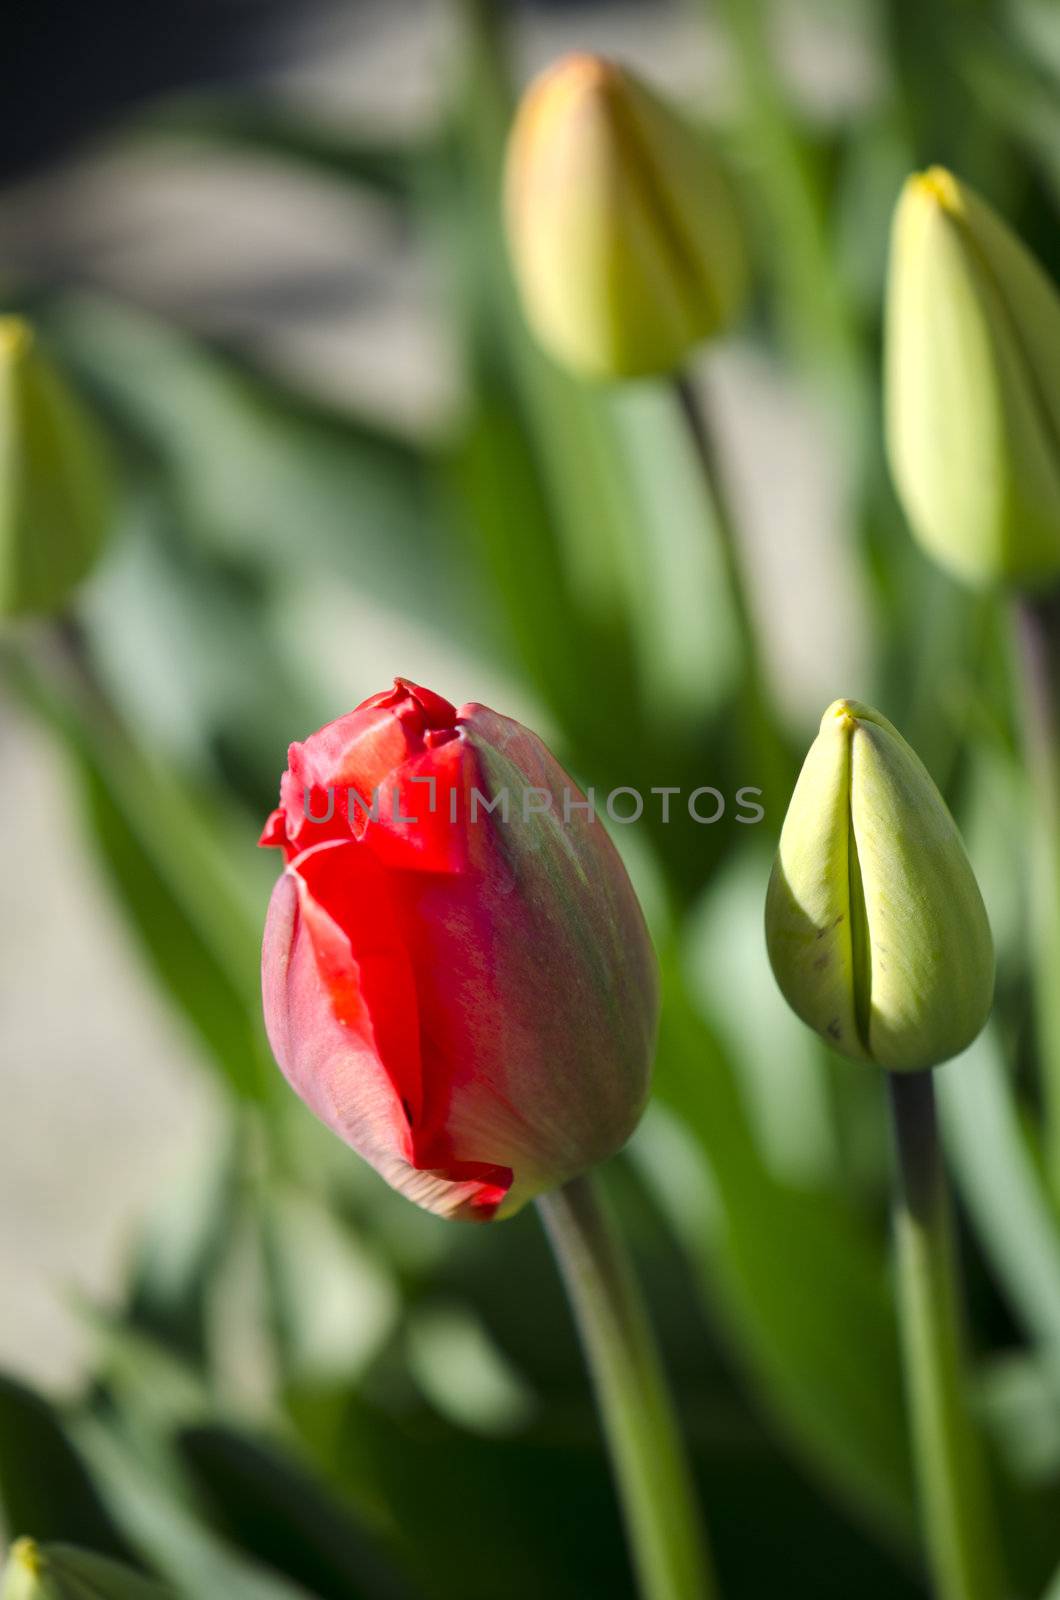 red tulip in the field of yellow tulips by seattlephoto